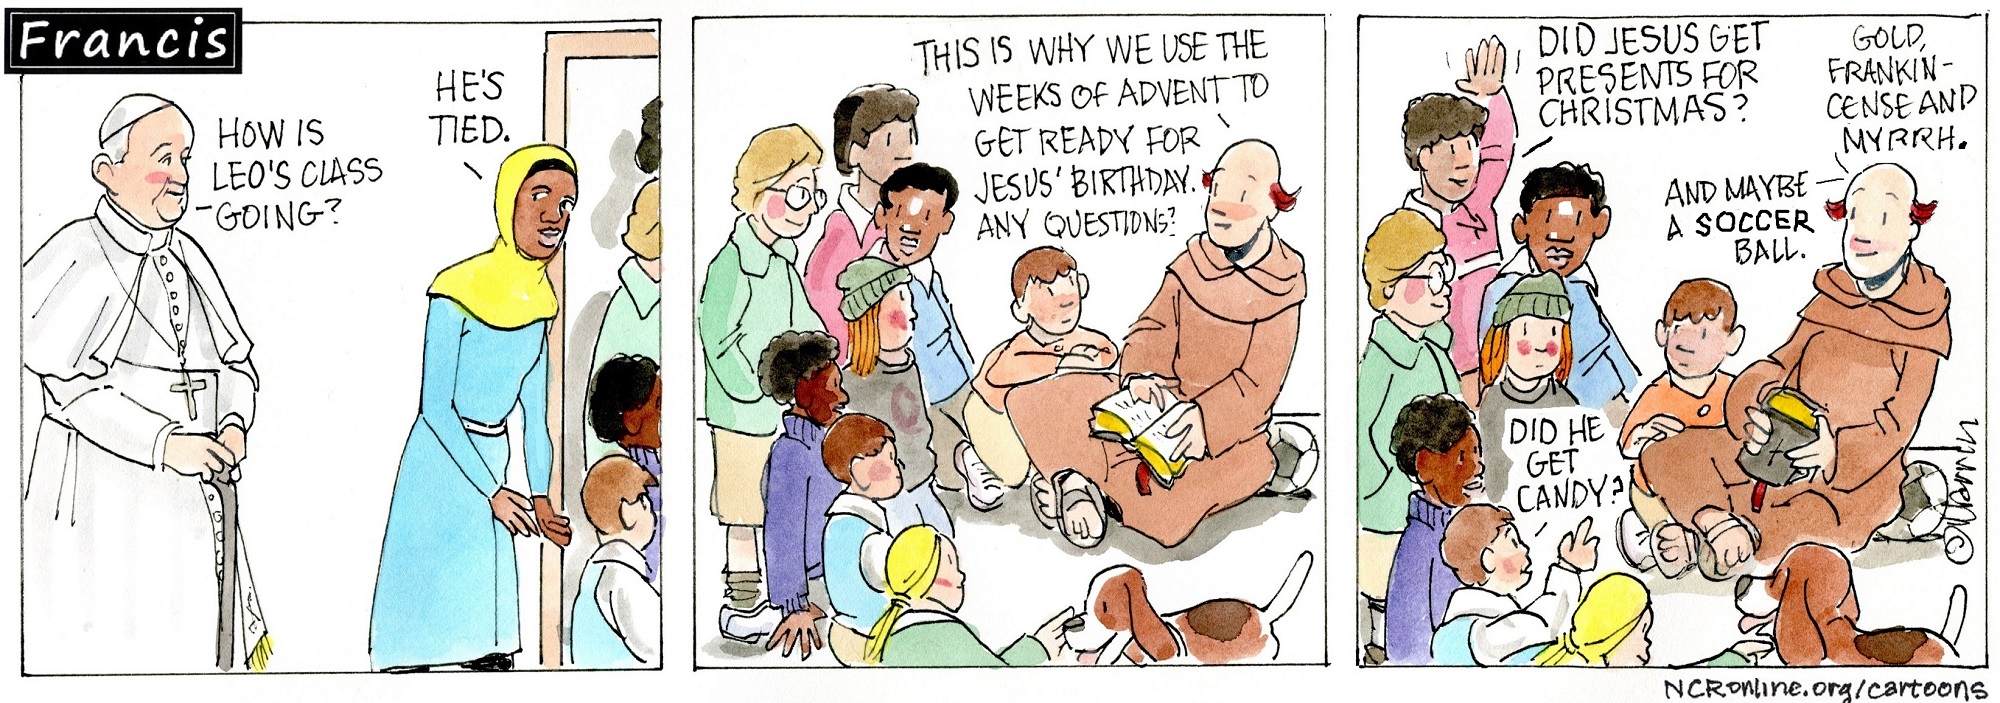 Francis, the comic strip: Brother Leo helps his class get ready for Advent.